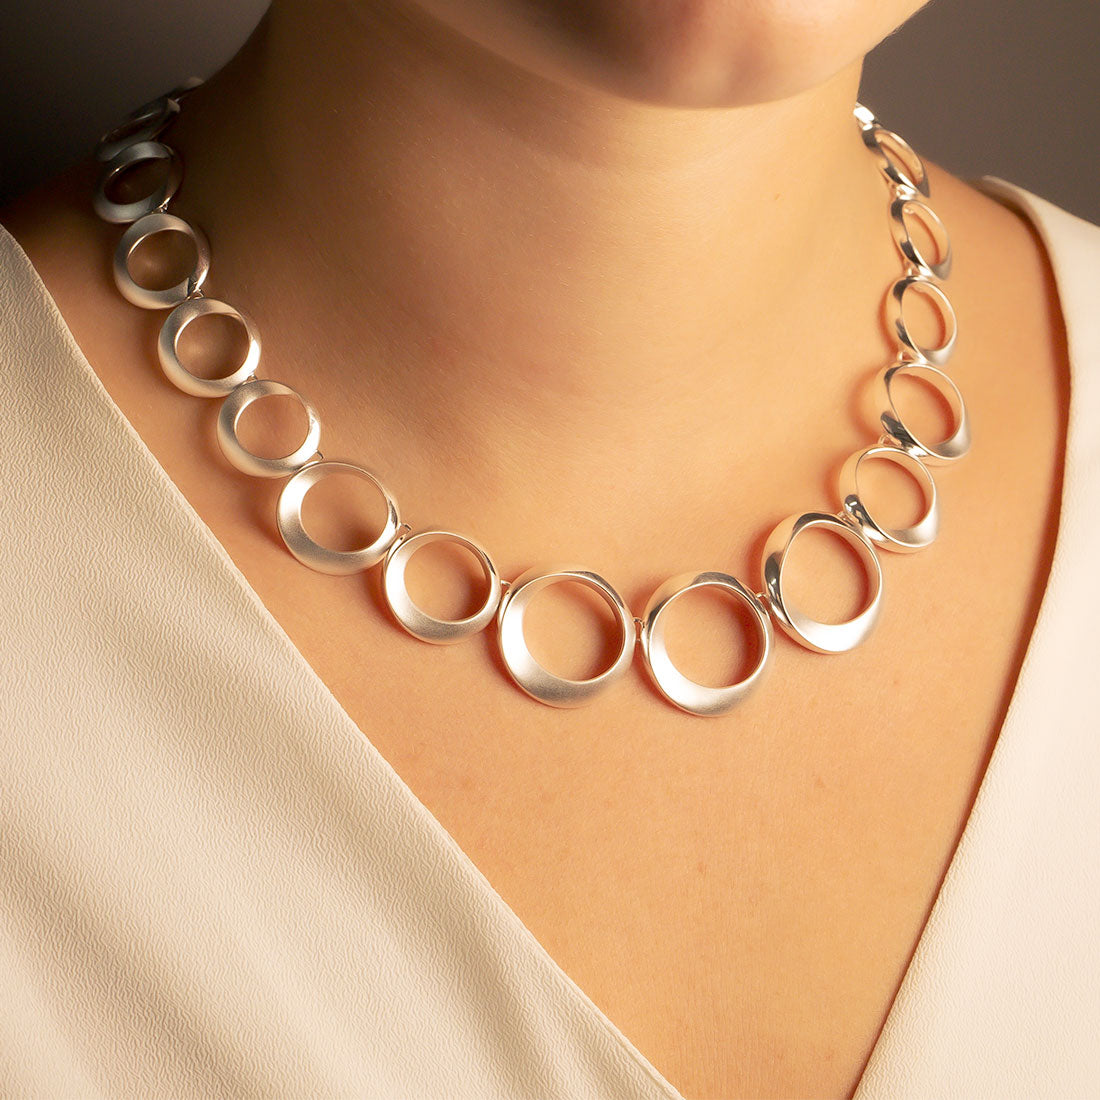 Silver Satin & Polished Circle Links Necklace